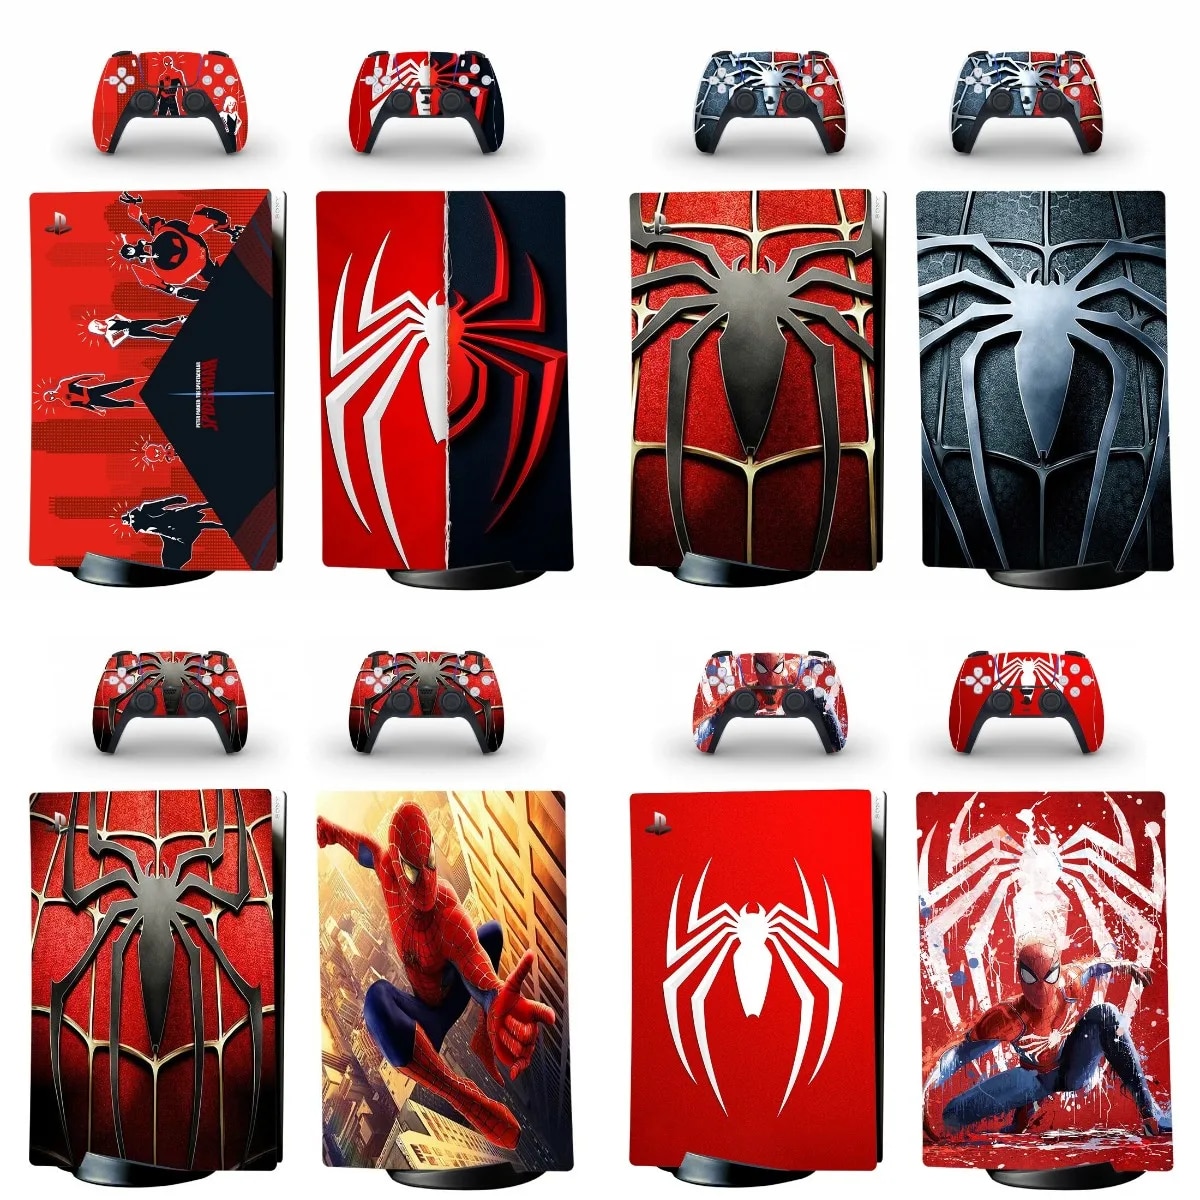 【Clearance sale】 Spider Ps5 Digital Version Man Skin Sticker Decal Cover For 5 Console Controller Skin Sticker Vinyl